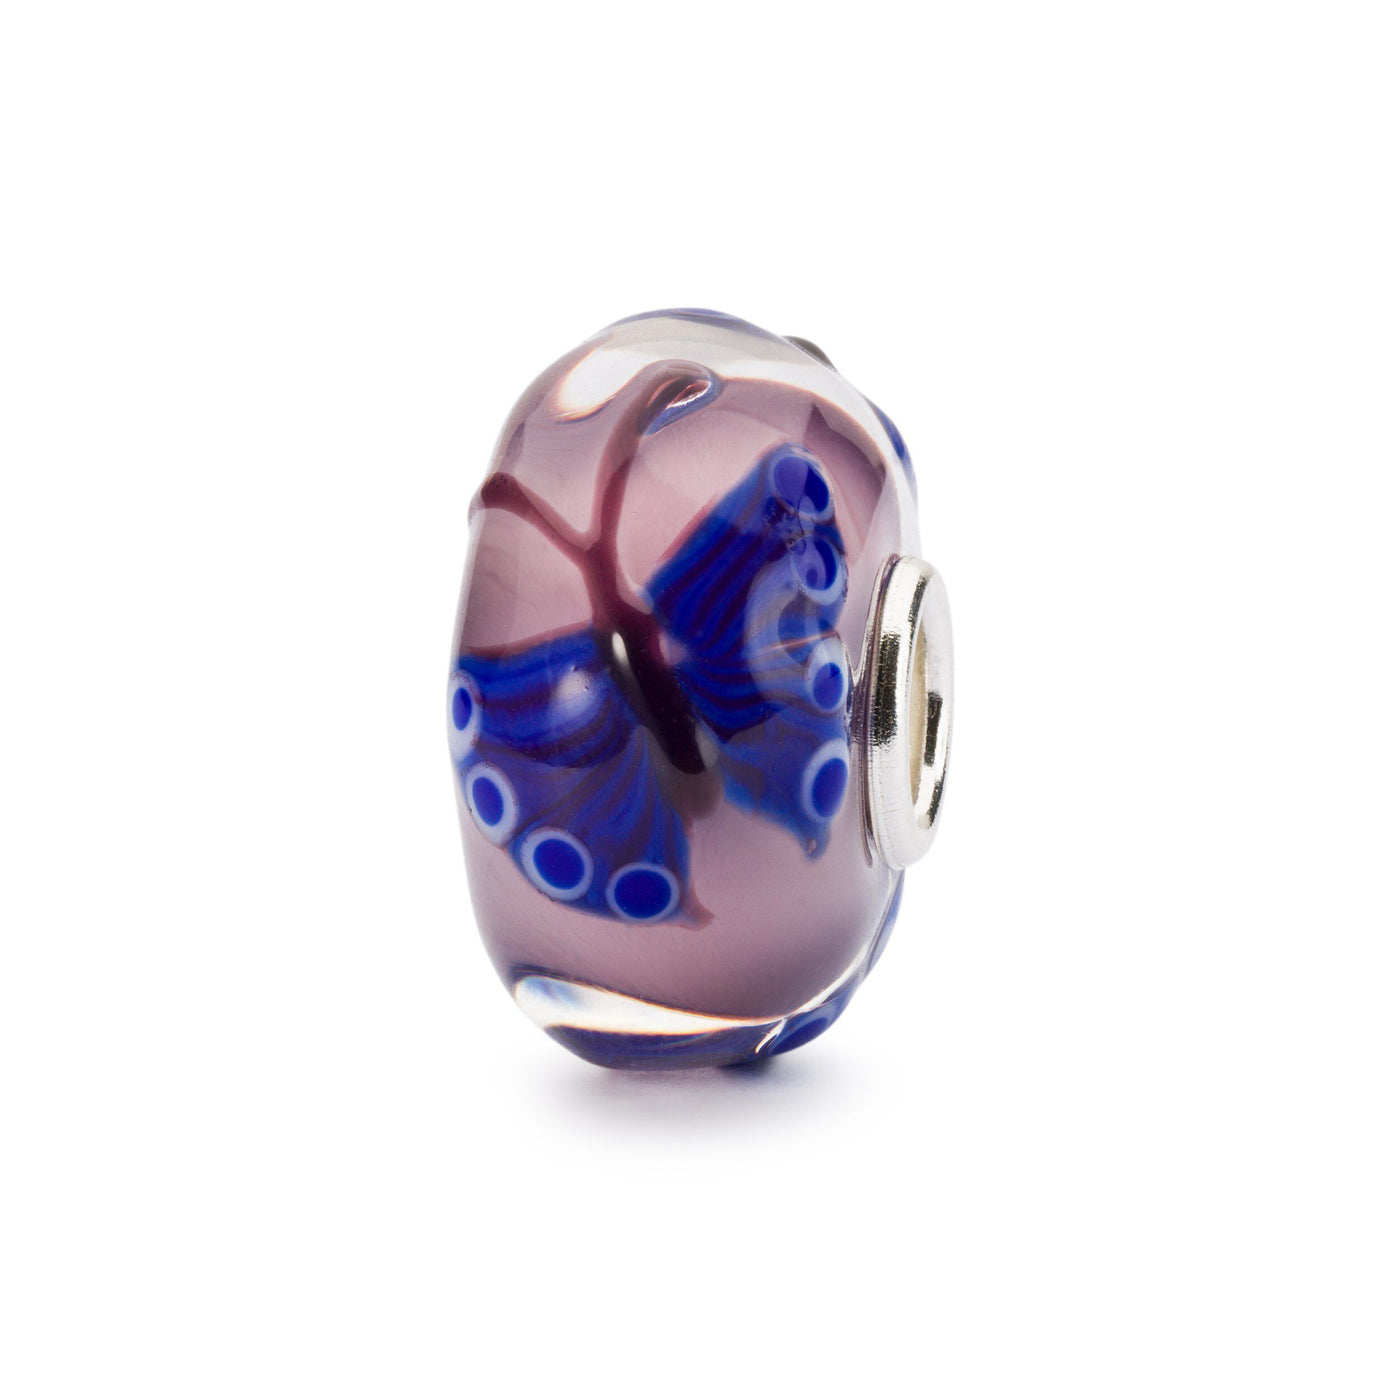 Jewellery bead in glass with blue butterflies on a light rose background 